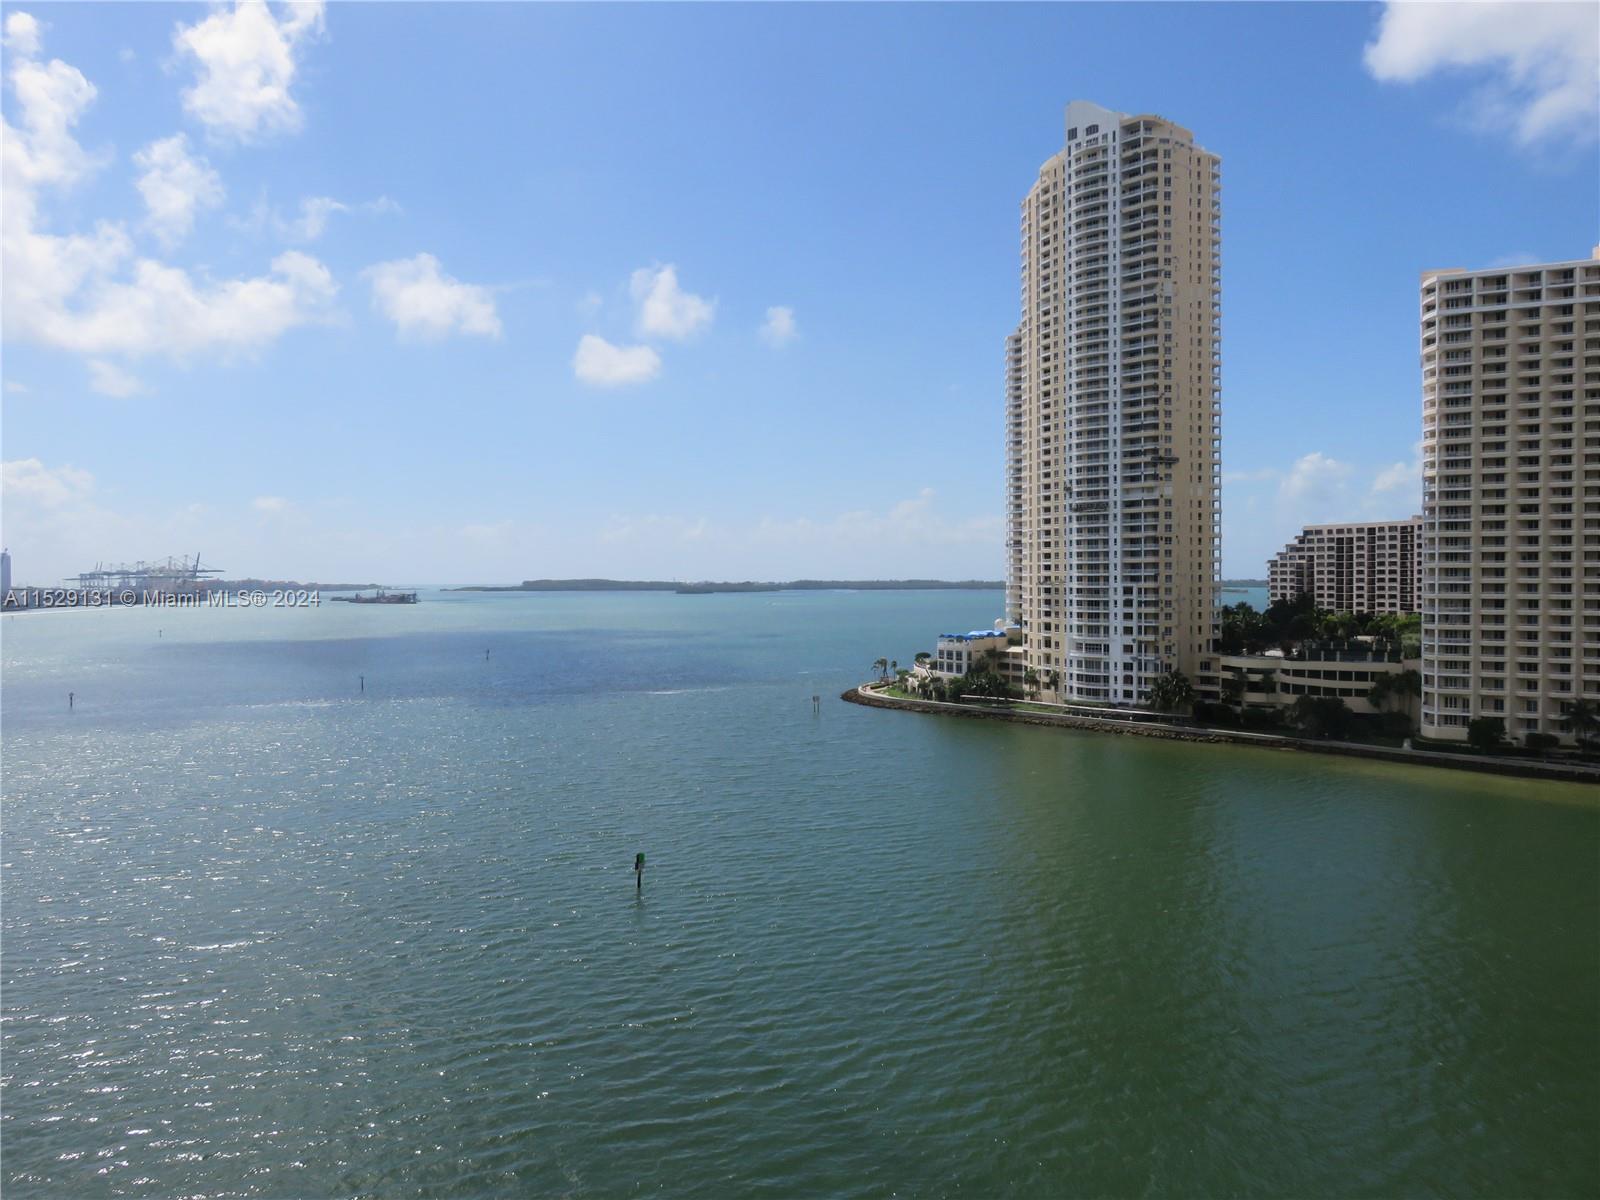 Beautiful 2 bedrooms 2 baths split plan condo with direct views of Biscayne Bay, Miami River, and Brickell Skyline.
Italian wood kitchen cabinets, granite counter-tops, stainless steel appliances, and marble bath counter-tops.
Building amenities incl: 2 swimming pools, Jacuzzi, 2 Party Rooms, 2 Fitness Centers, Conf. Rm., Convenience
Store, and 24 hours security, valet, and concierge. Centrally located within walking distance to Arena, Performance
Center, Museums, and Brickell Village, and minutes to SoBe.